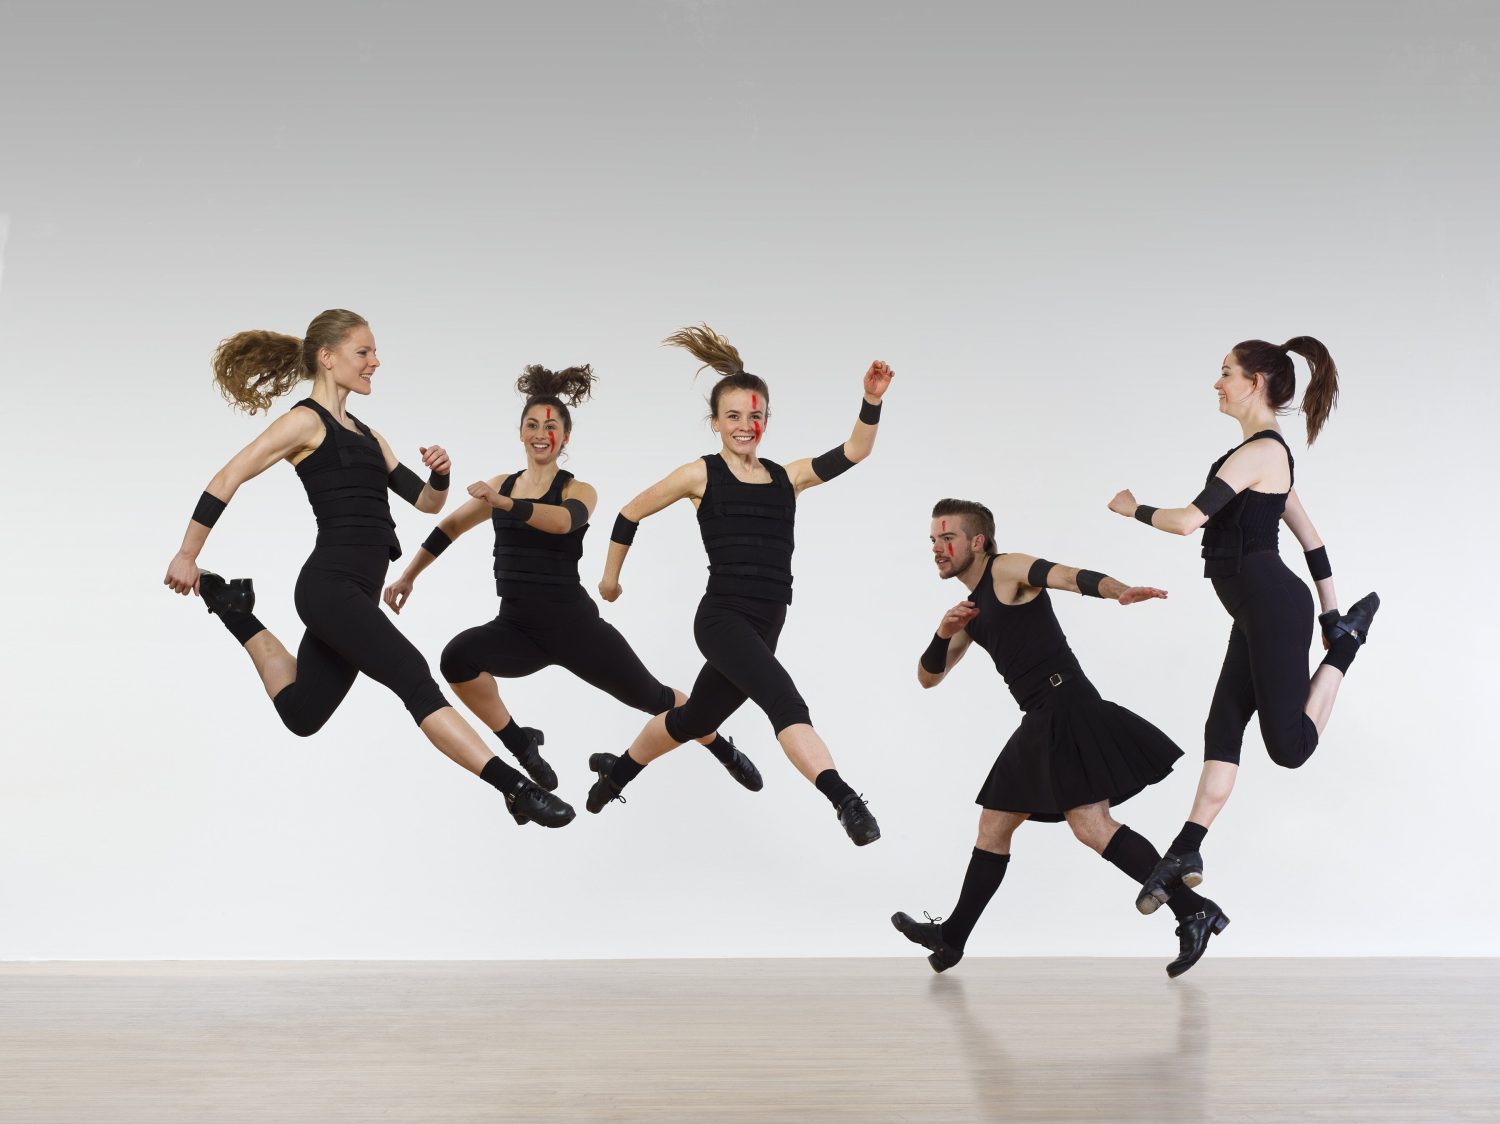 dancers jumping in mid air in black clothes and face paint